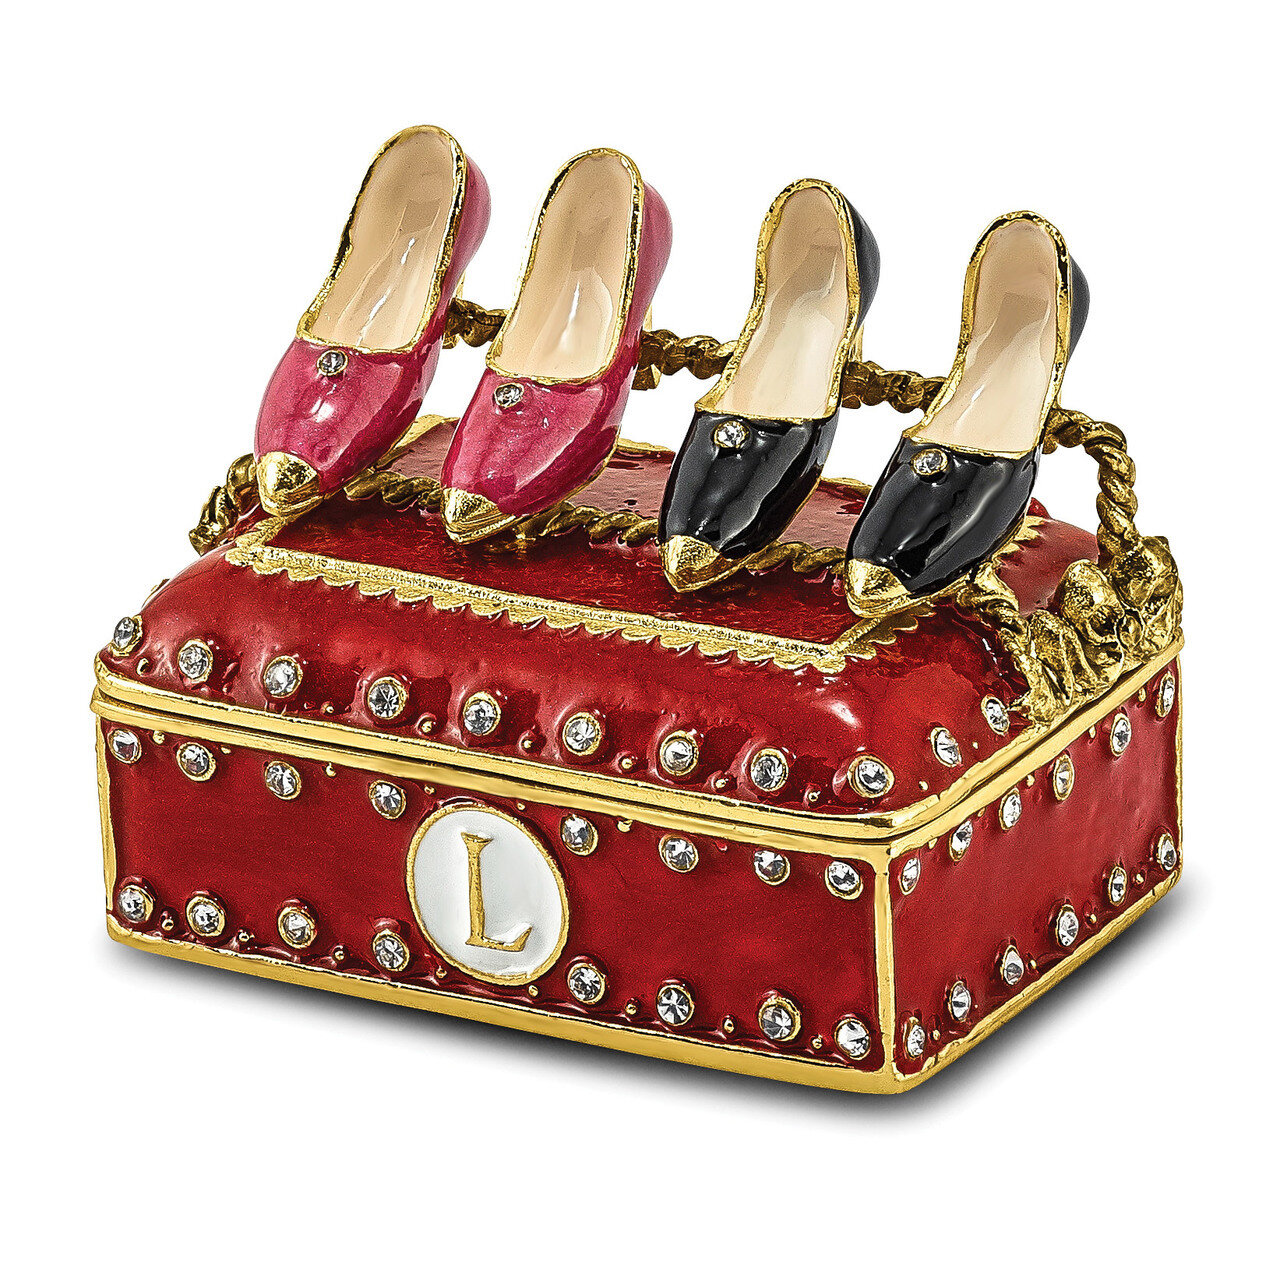 Rack with Shoes Trinket Box Enamel on Pewter by Jere